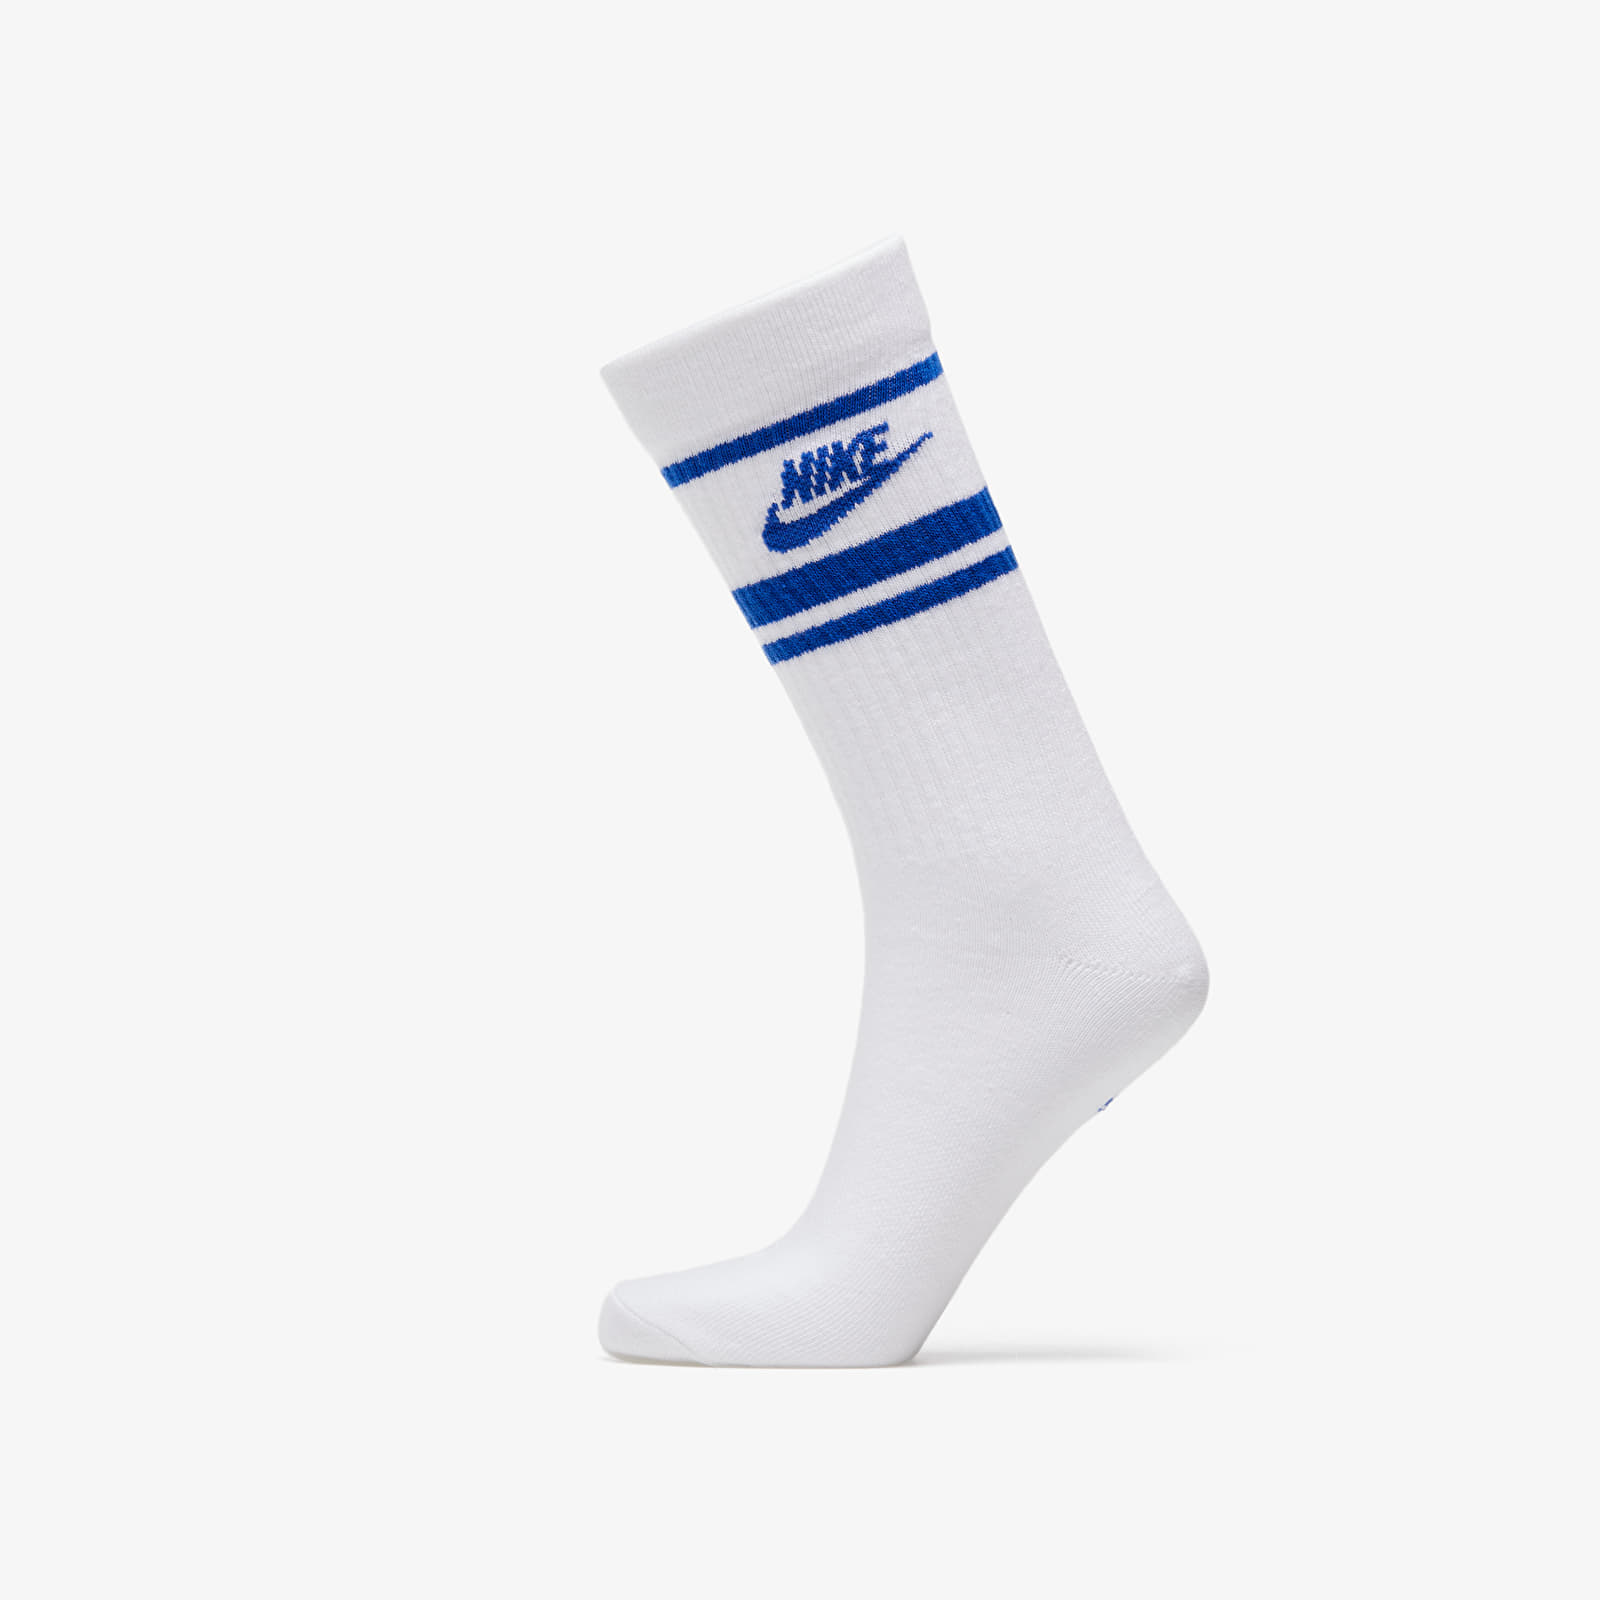 Chaussettes Nike Sportswear Essential Crew Socks (3 Pairs) White/ Game Royal/ Game Royal